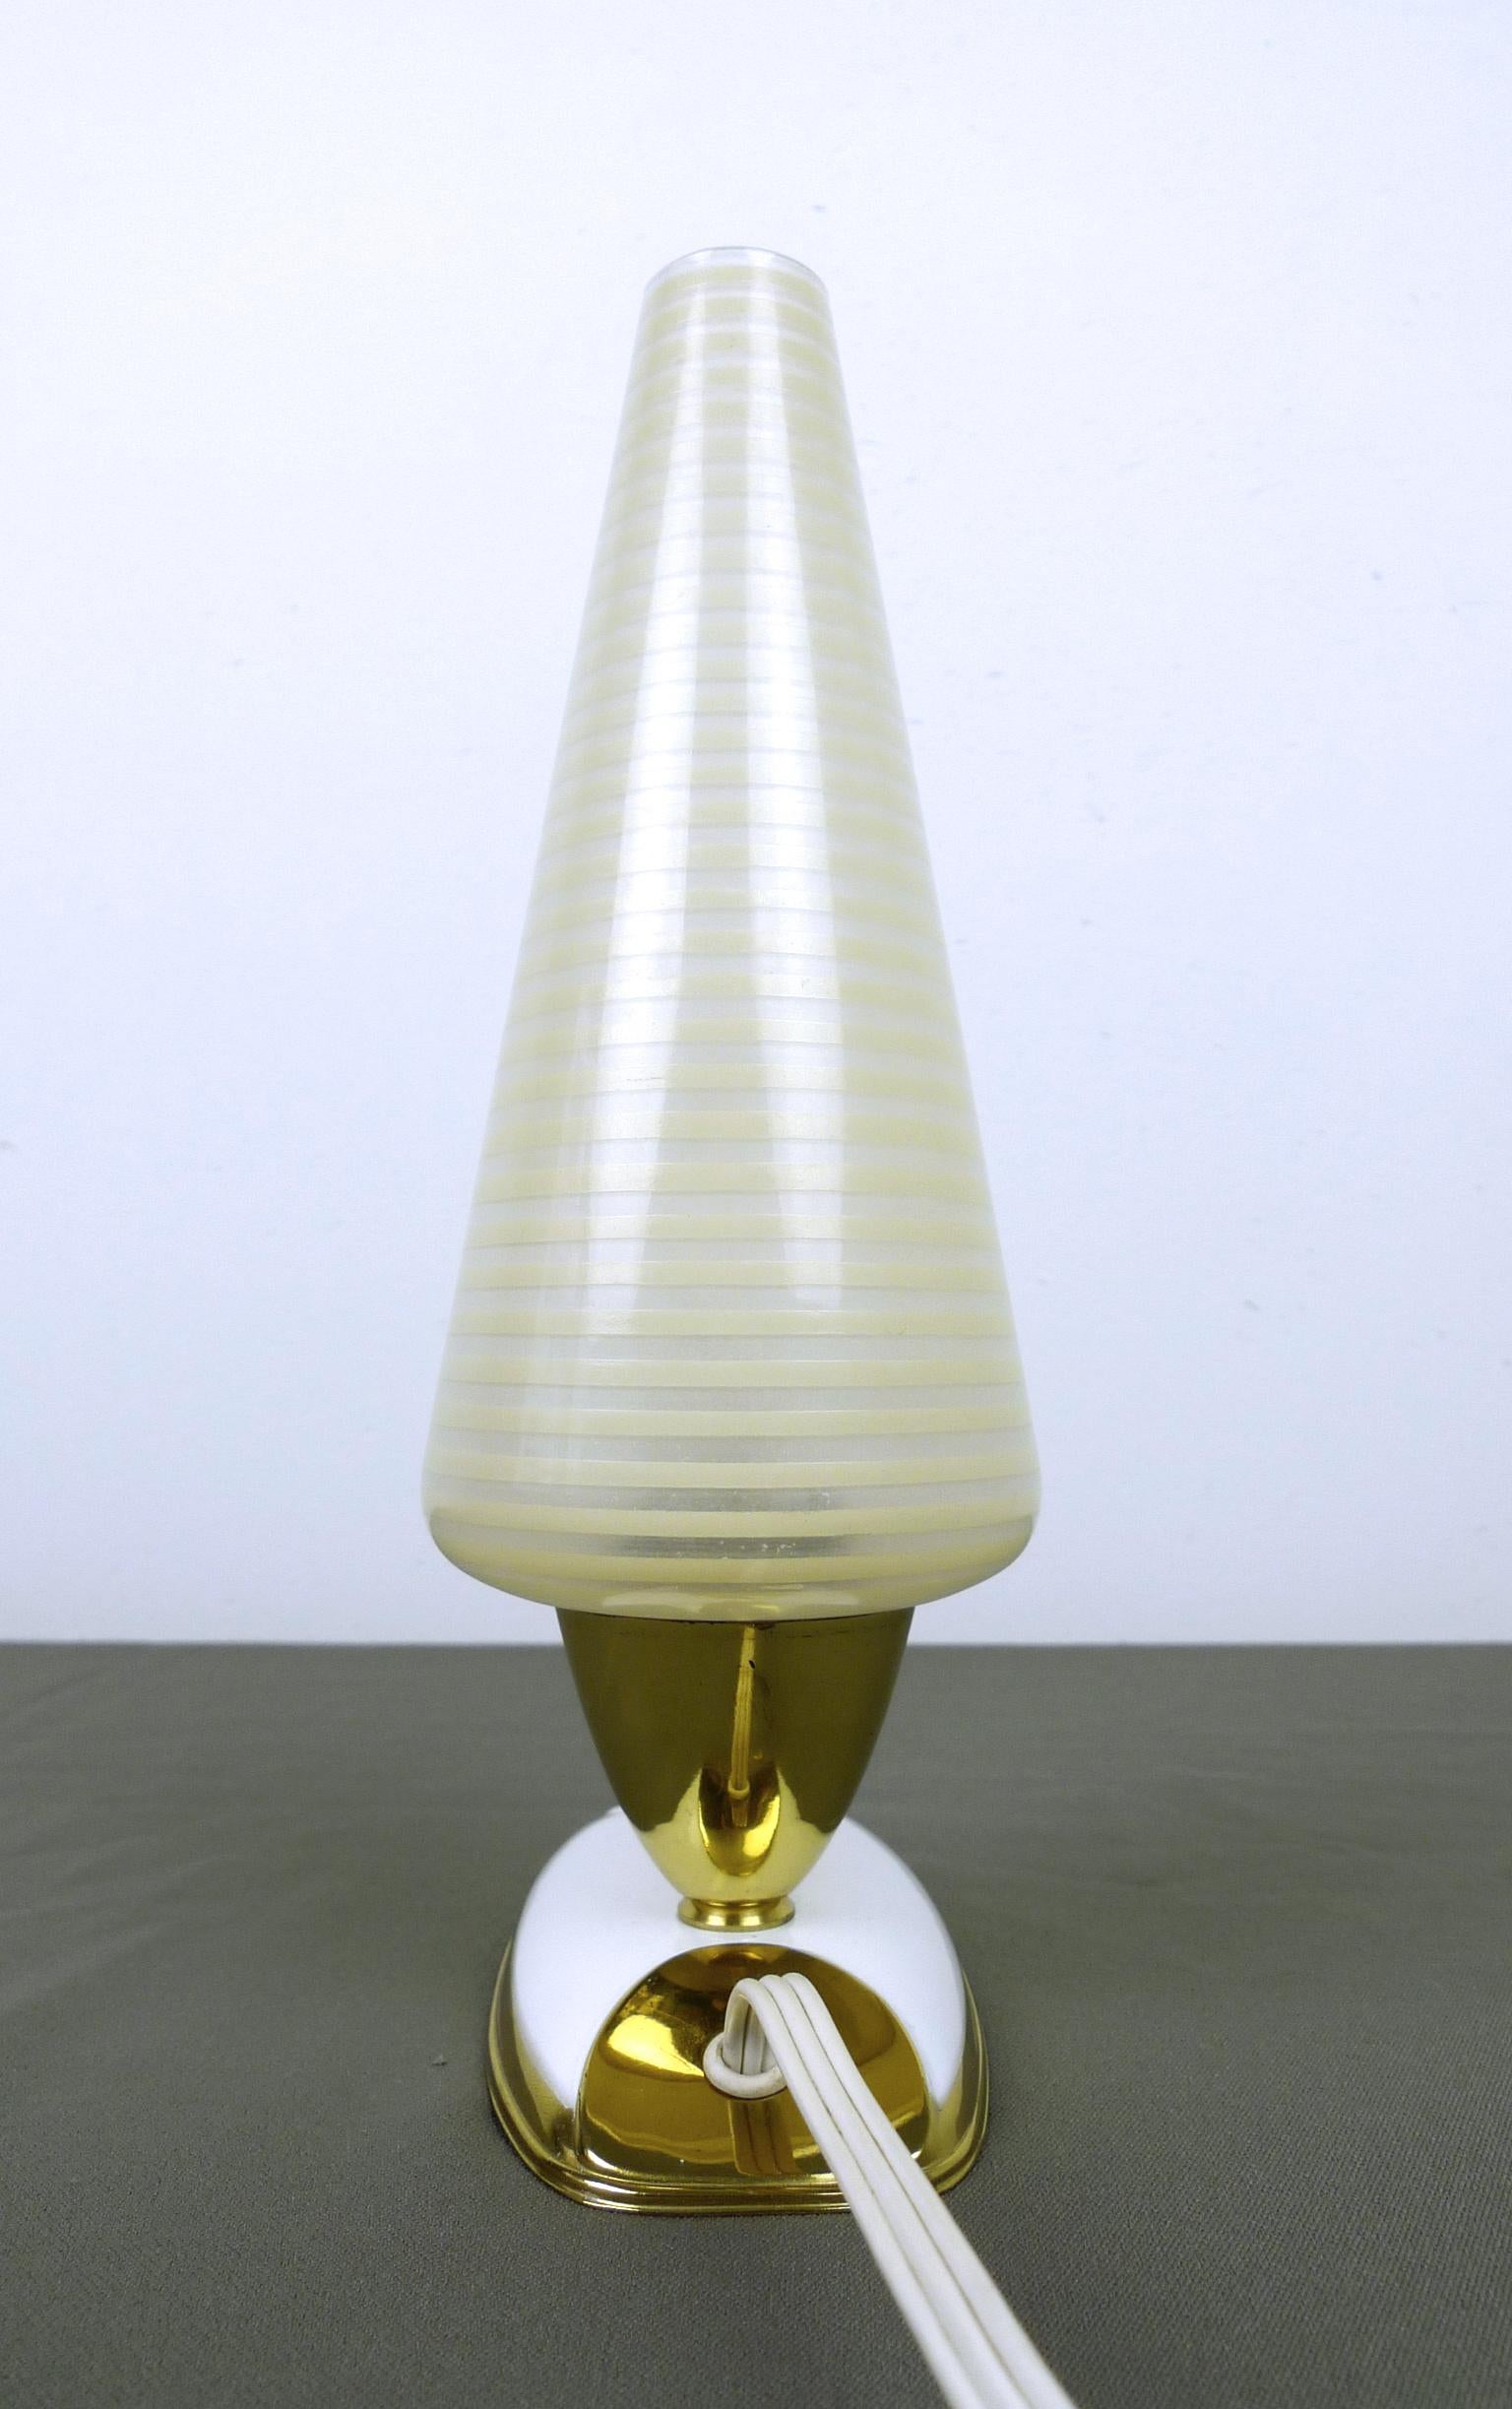 Metal Pair of Table Lamps with Striped Glass Diffusers, Germany, 1950s For Sale